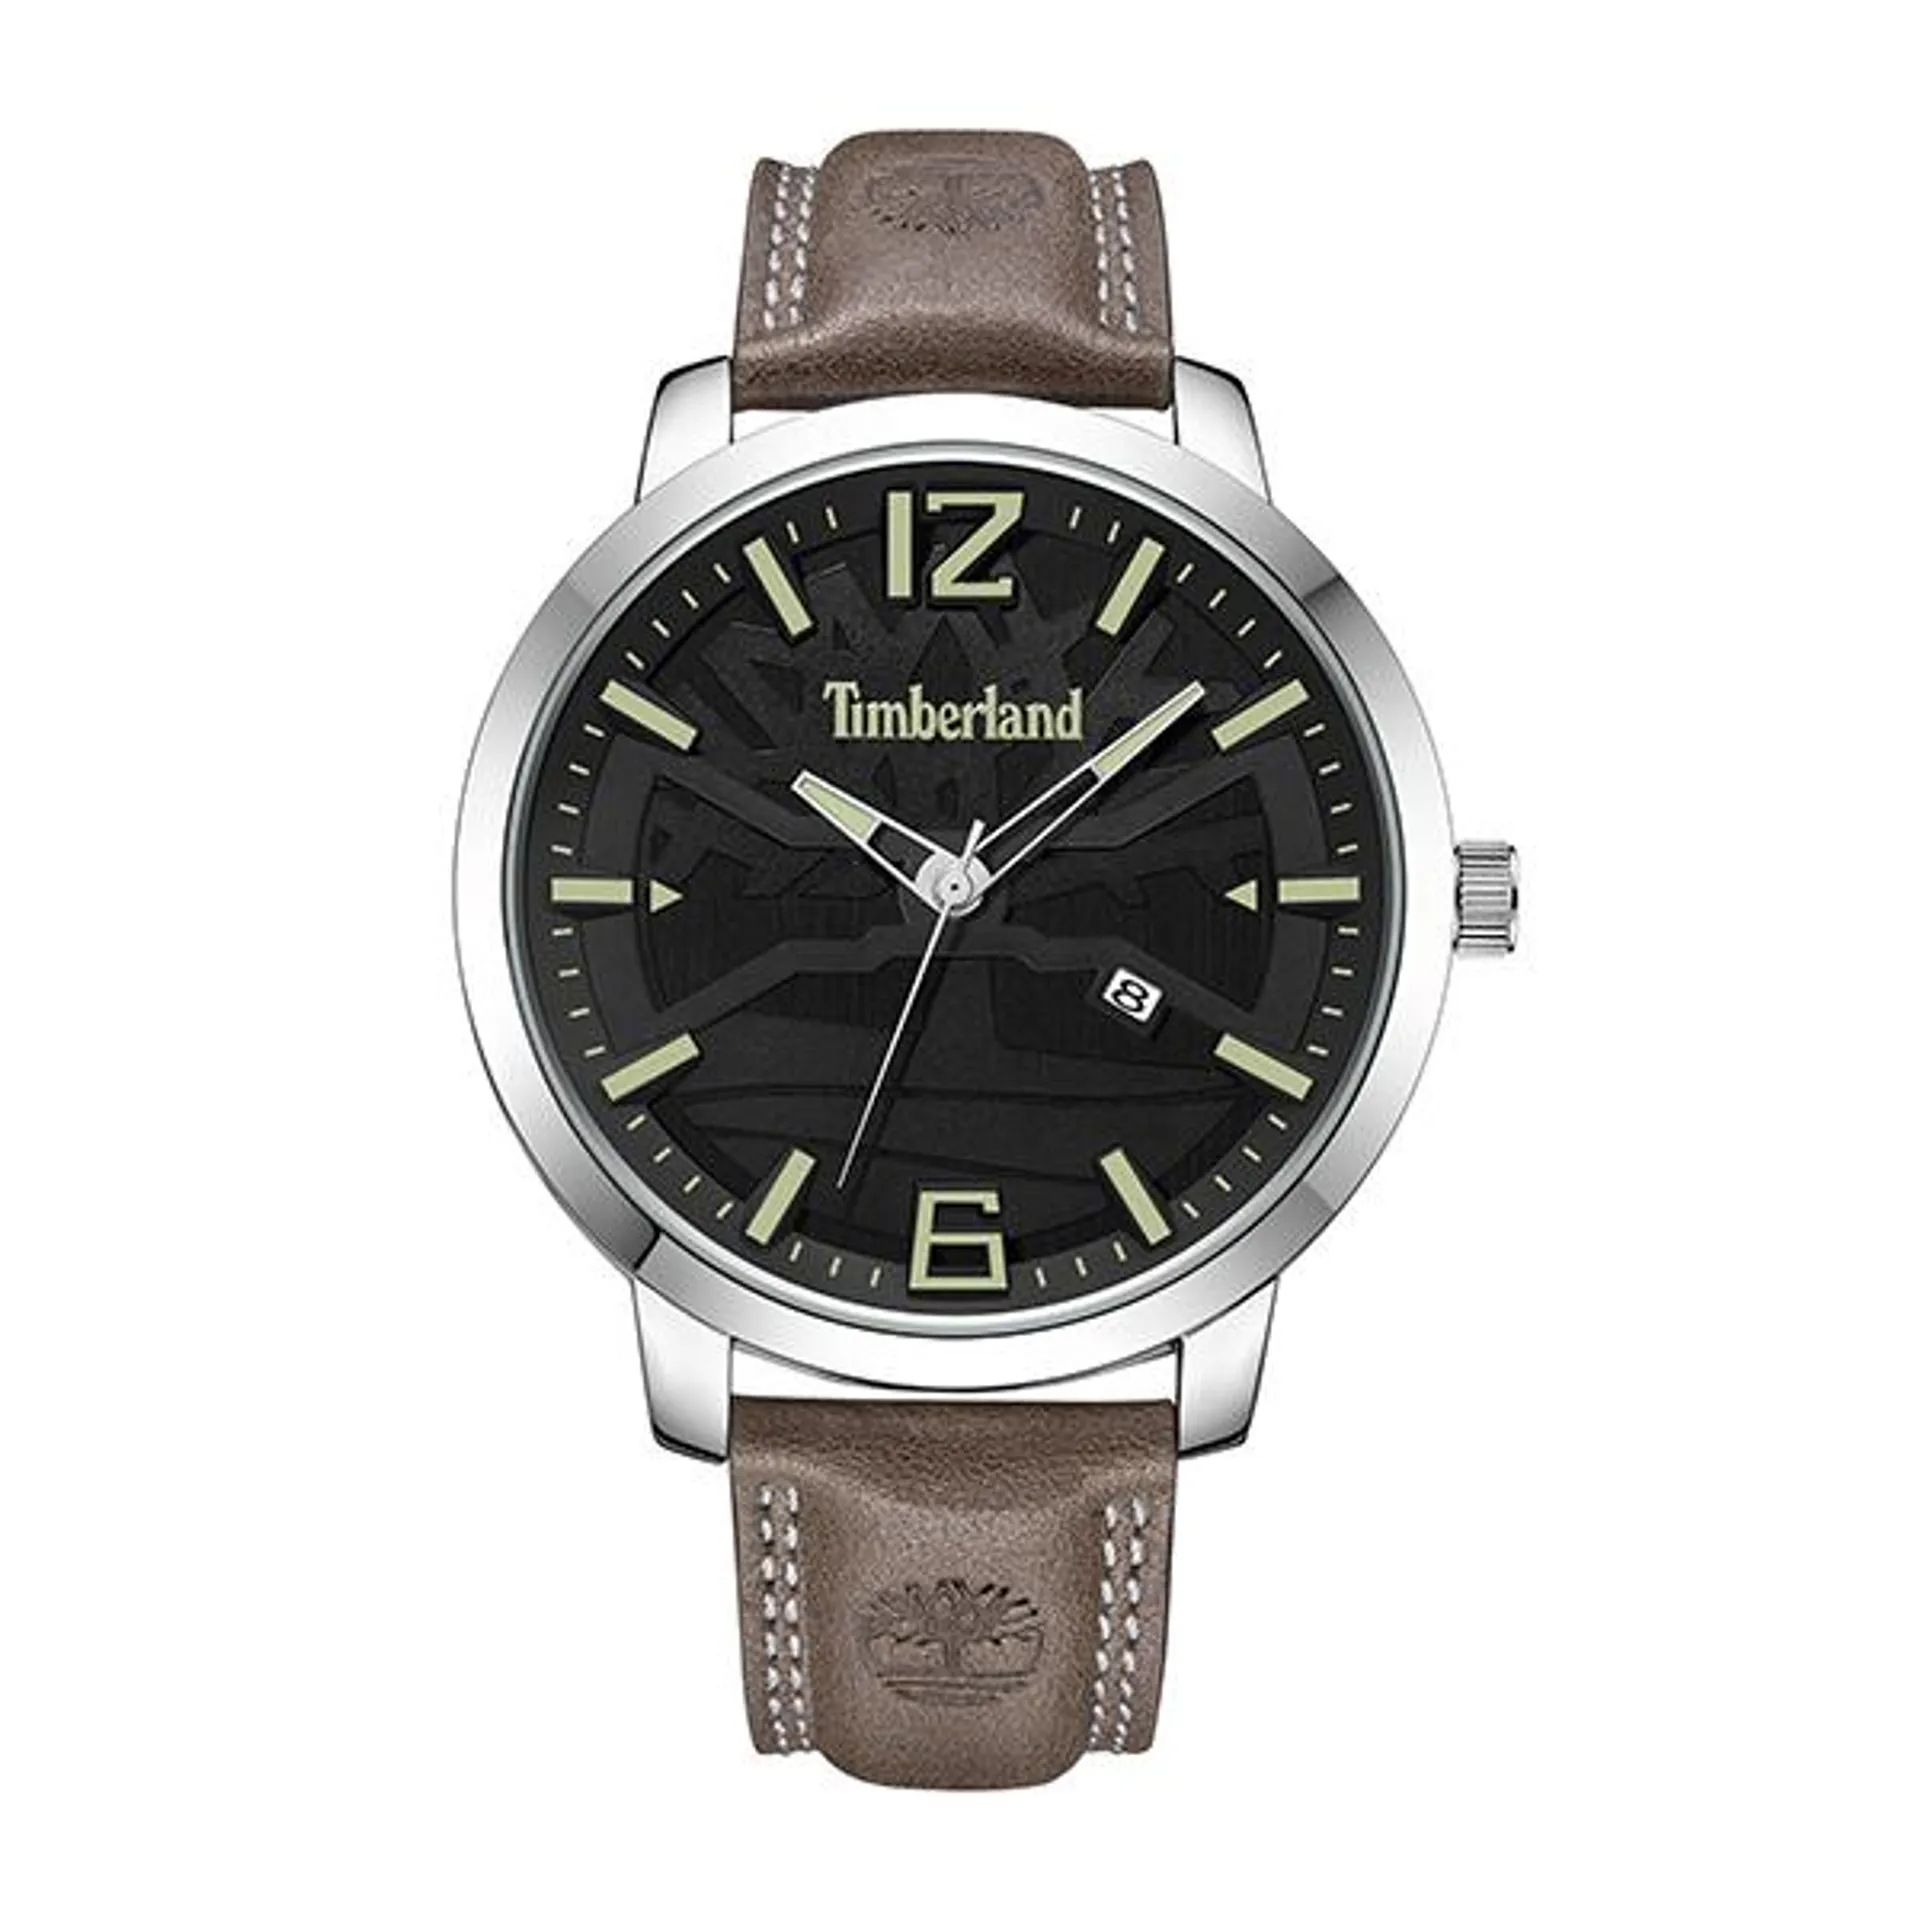 Timberland Gents Clarksville Watch with Genuine Leather Strap